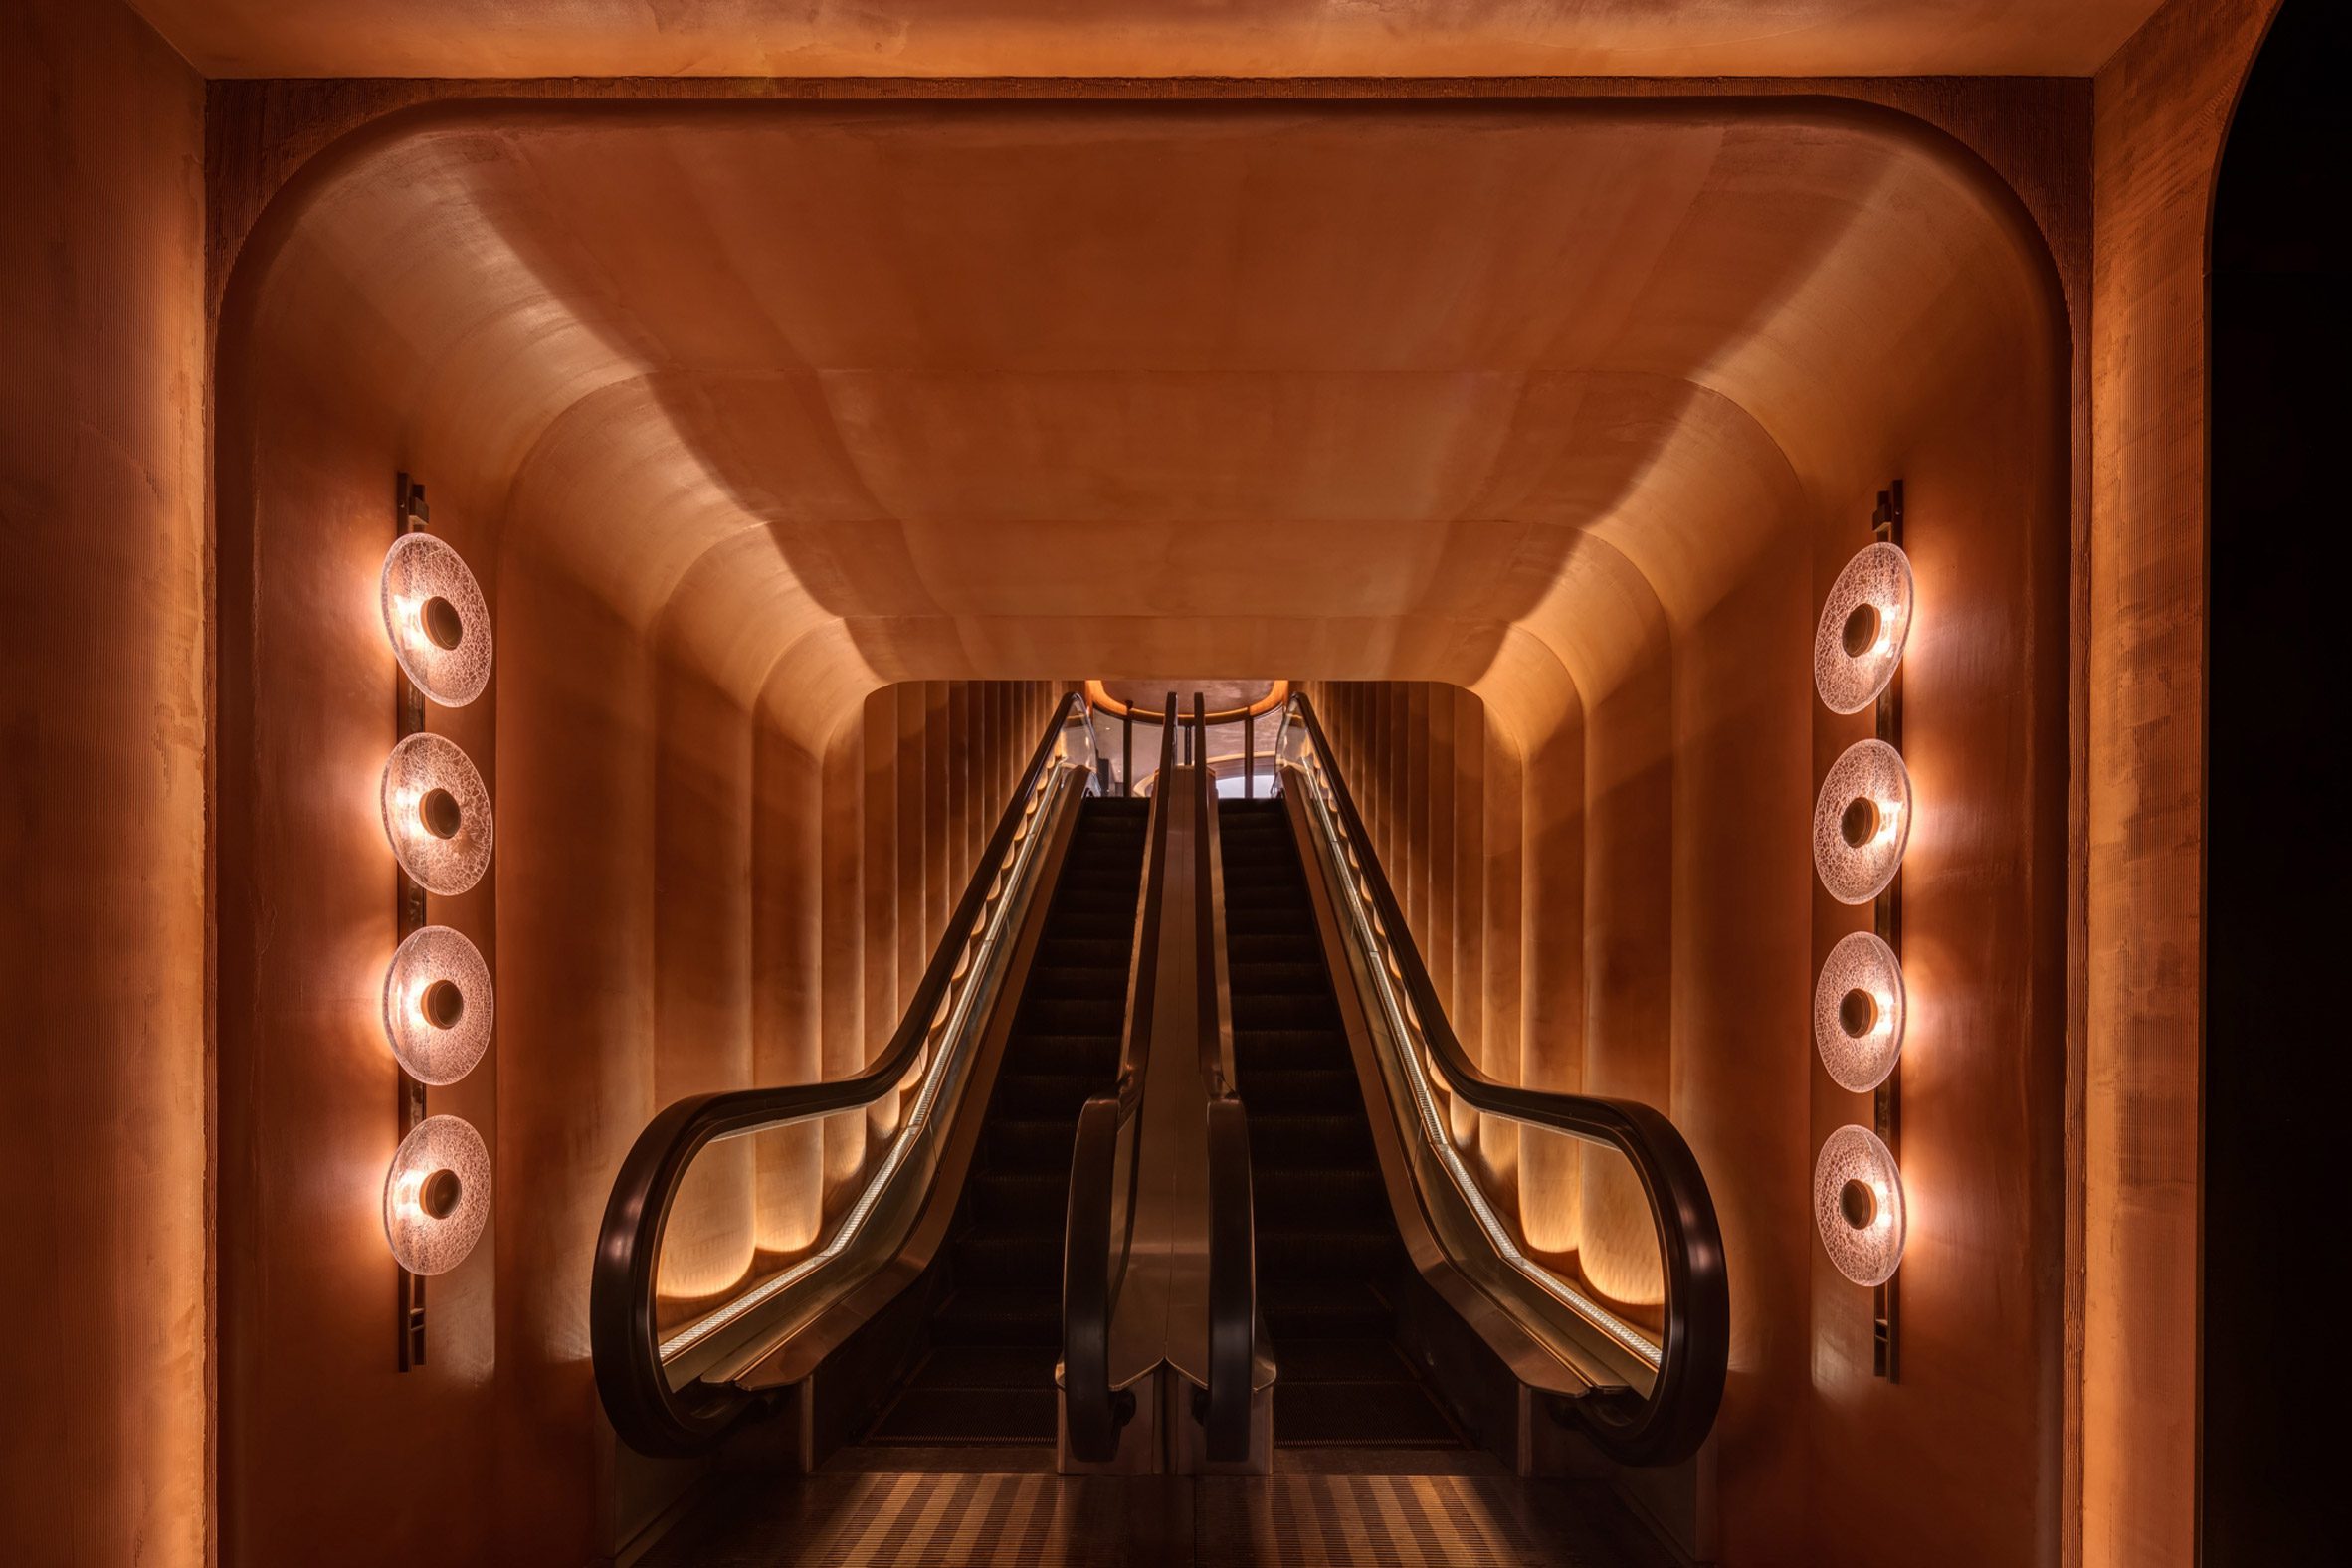 Entrance escalator of Gym Town in Hong Kong by MR Studio